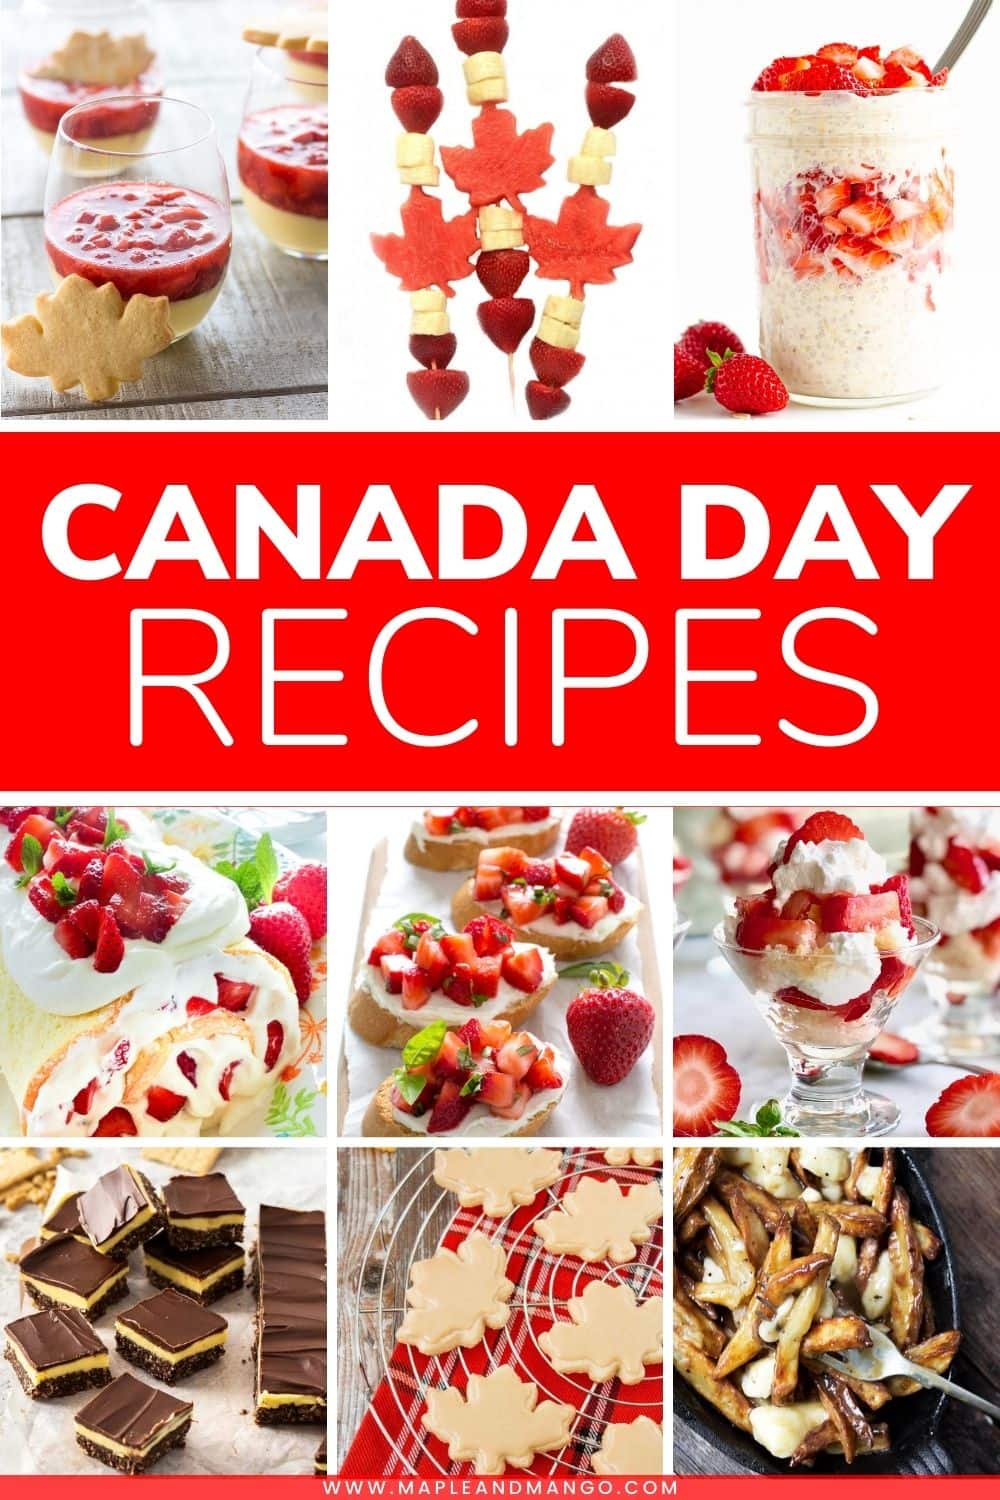 Collage of Canada Day food ideas with text overlay "Canada Day Recipes".